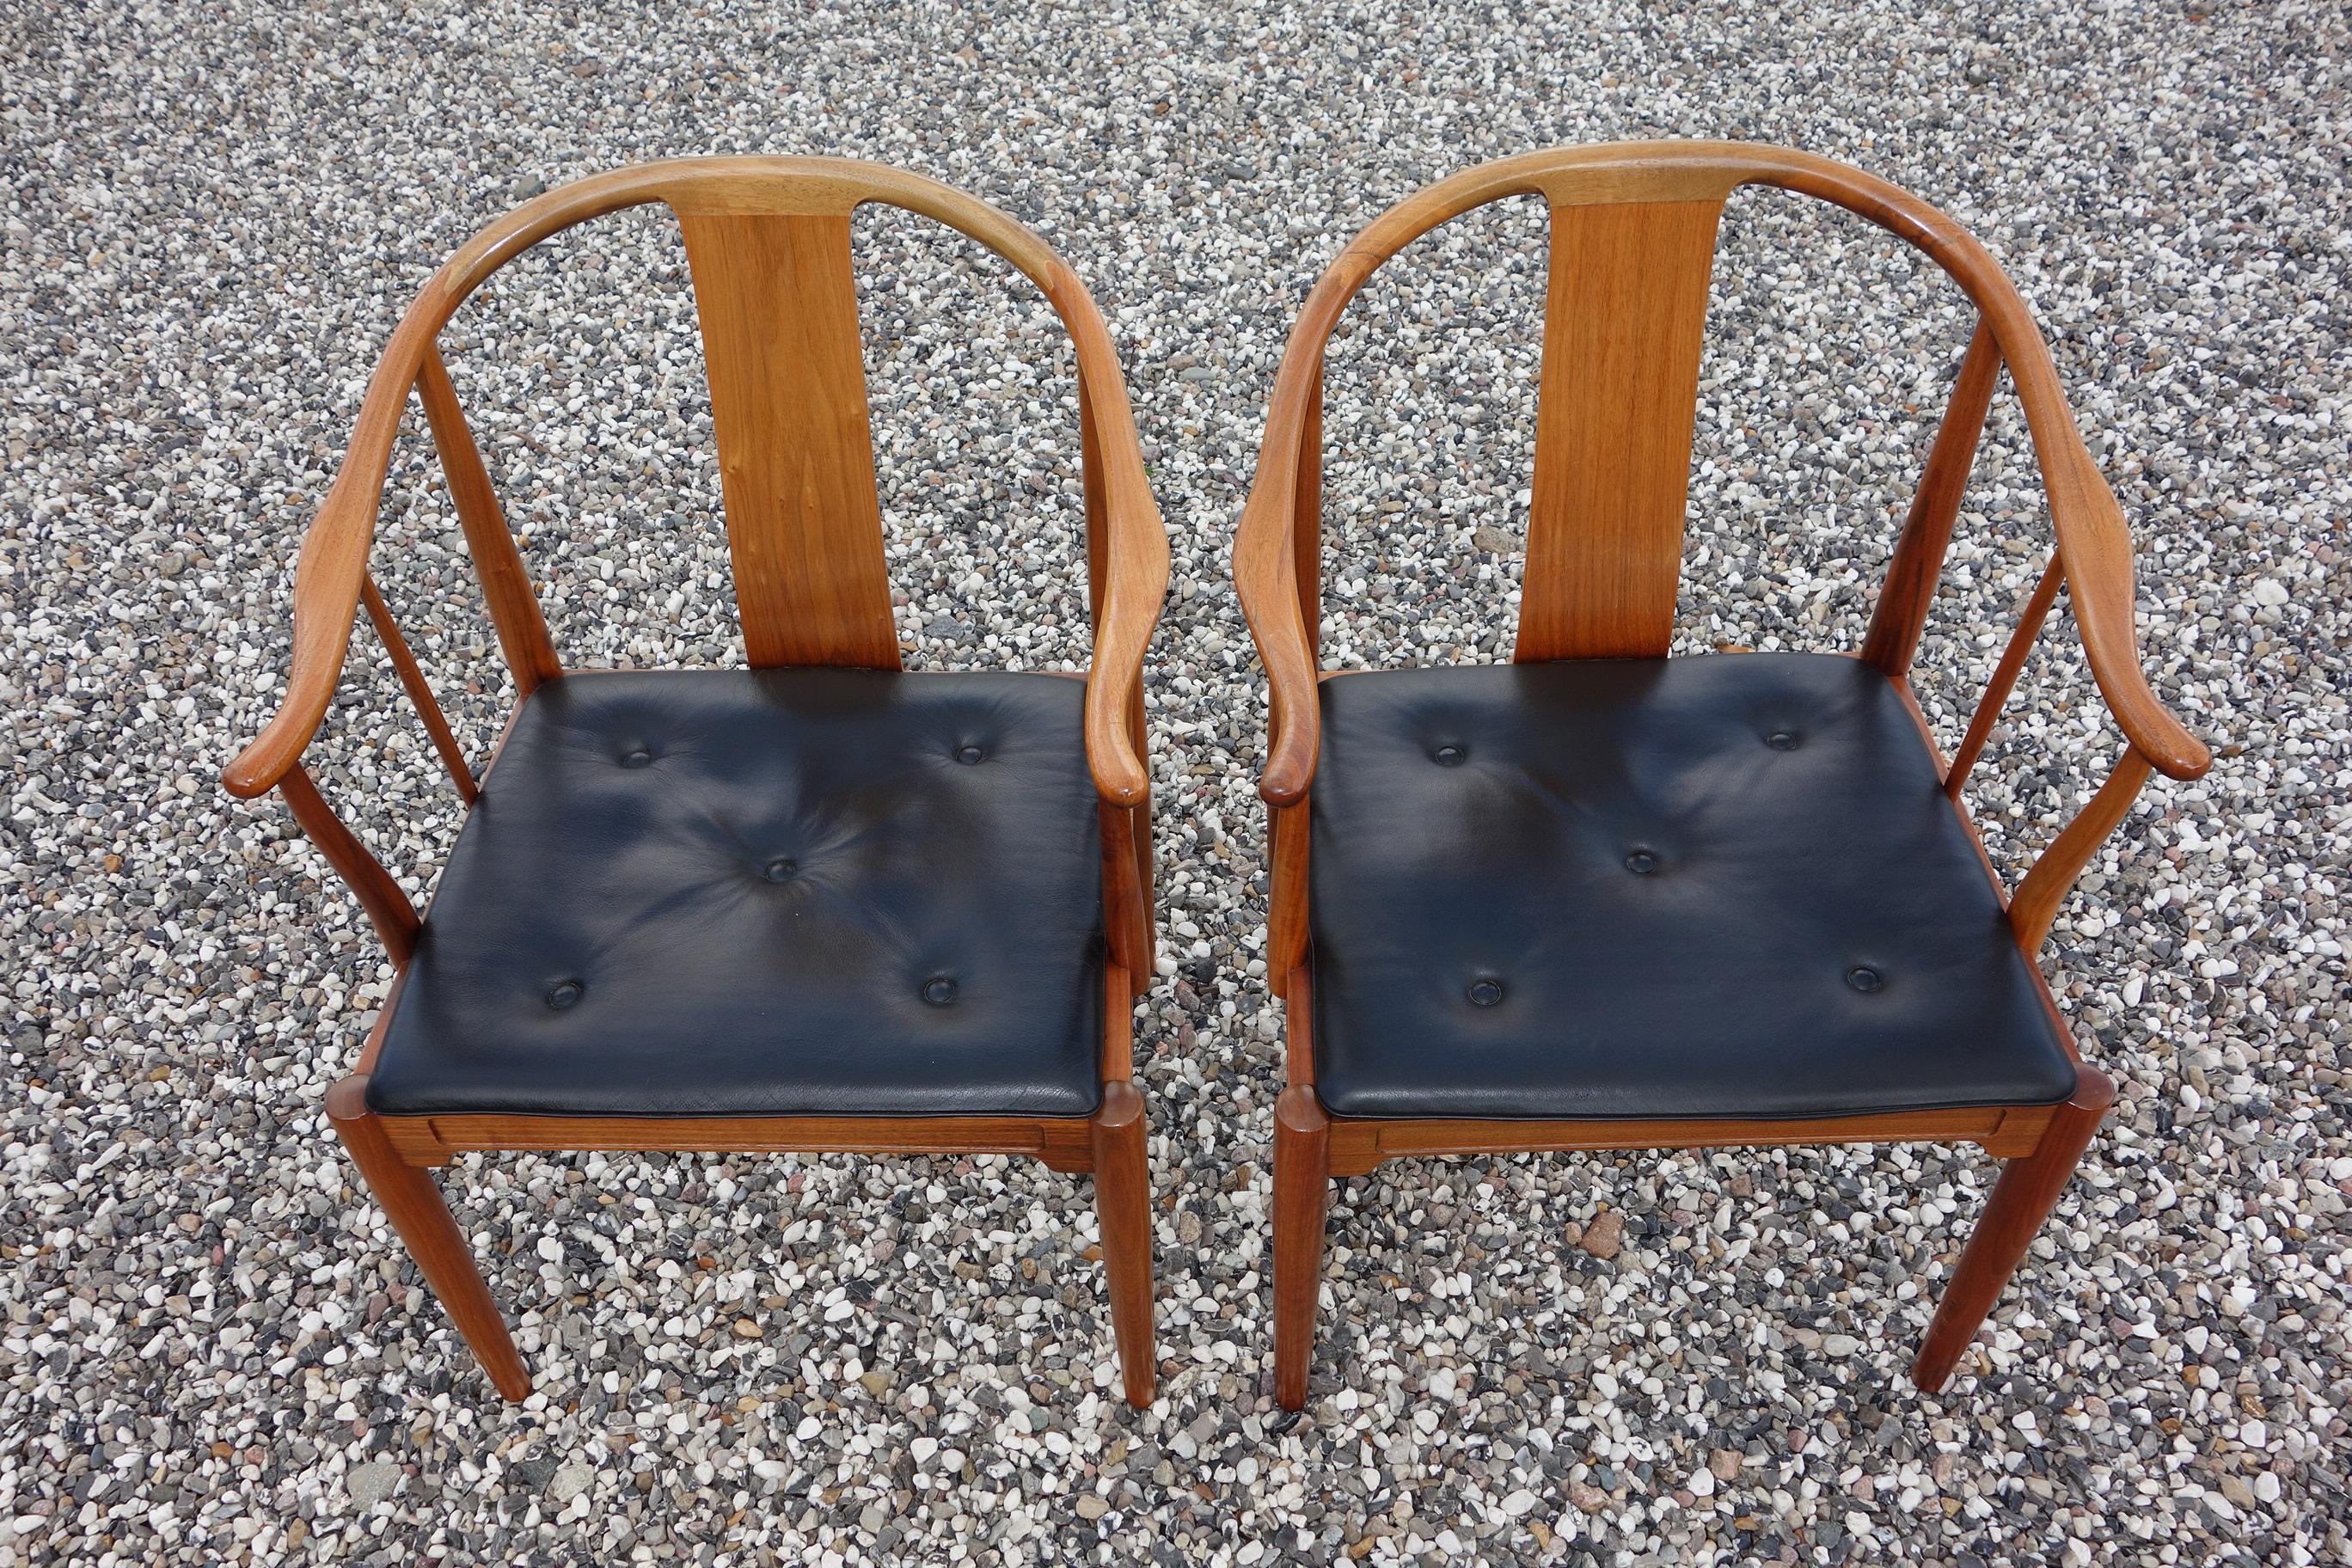 Scandinavian Modern Hans J. Wegner, a Pair of 1977 Limited Edition Walnut Armchairs “China Chairs” For Sale